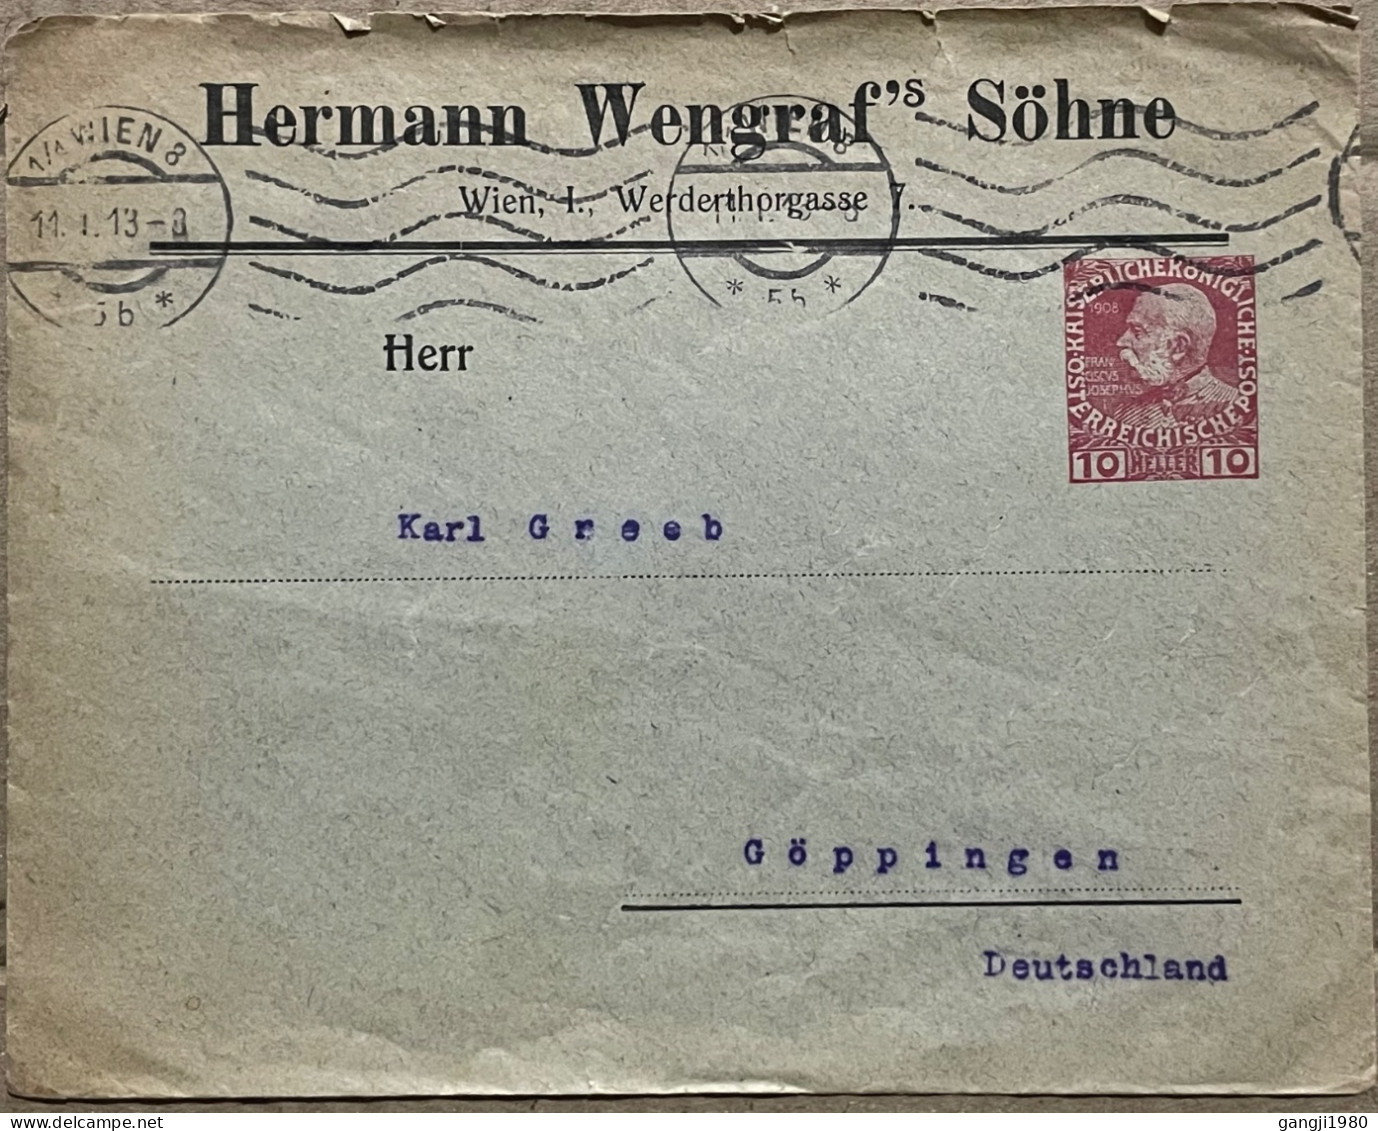 AUSTRIA 1913, PRIVATE PRINTED STATIONERY, COVER USED TO GERMANY, ADVERTISING HERMANIN WENGRAF'S SOHNE,   VIENNA CITY CAN - Covers & Documents